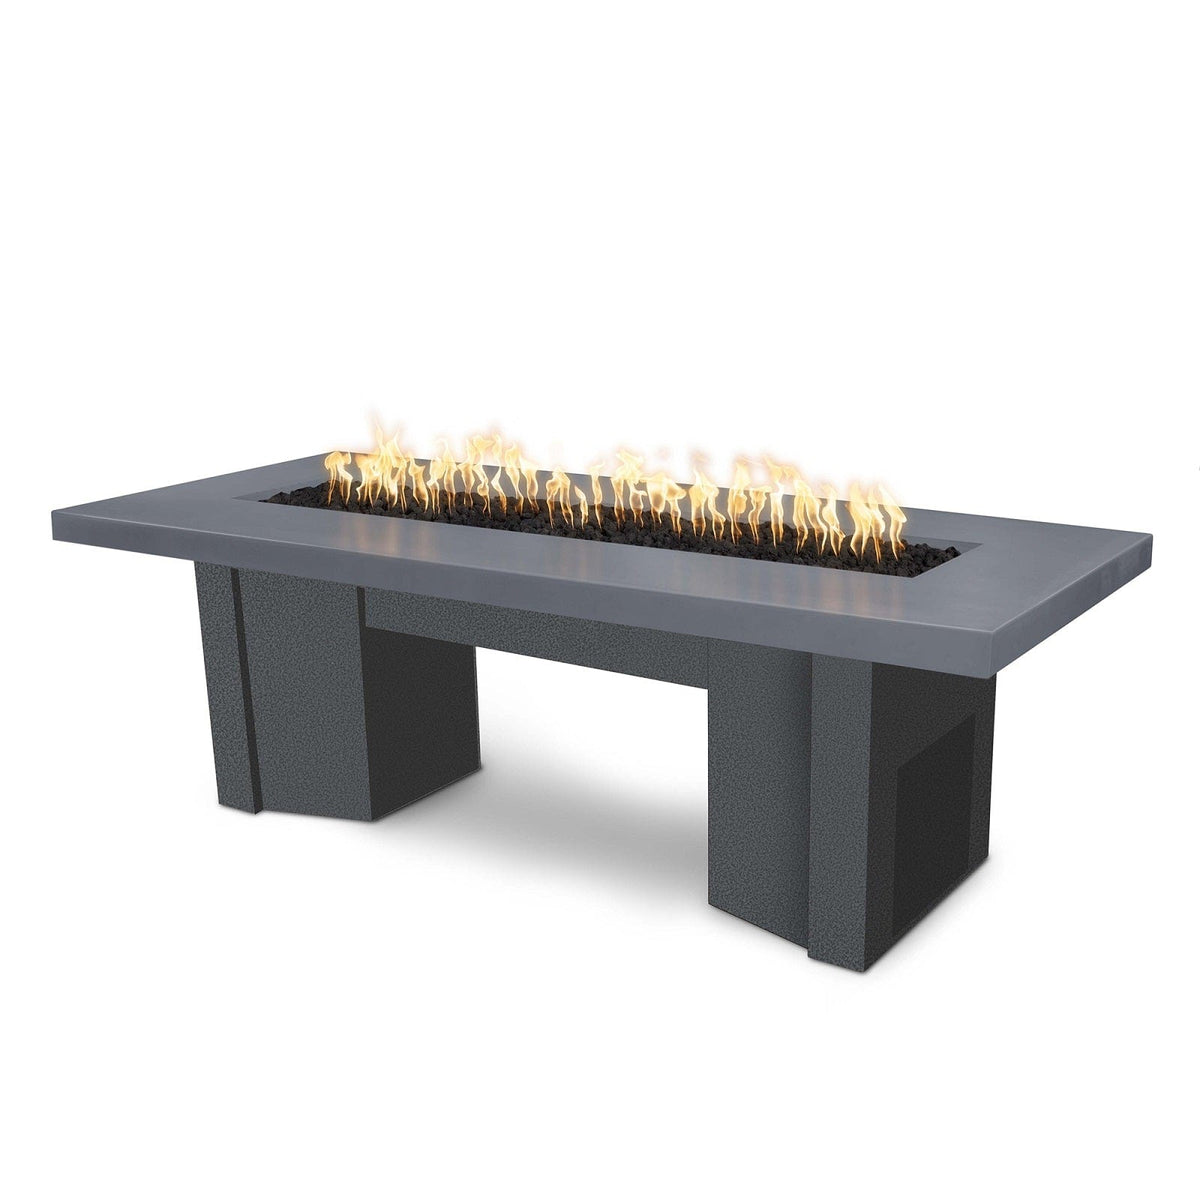 The Outdoor Plus Fire Features Gray (-GRY) / Silver Vein Powder Coated Steel (-SLV) The Outdoor Plus 78&quot; Alameda Fire Table Smooth Concrete in Liquid Propane - 12V Electronic Ignition / OPT-ALMGFRC78E12V-LP